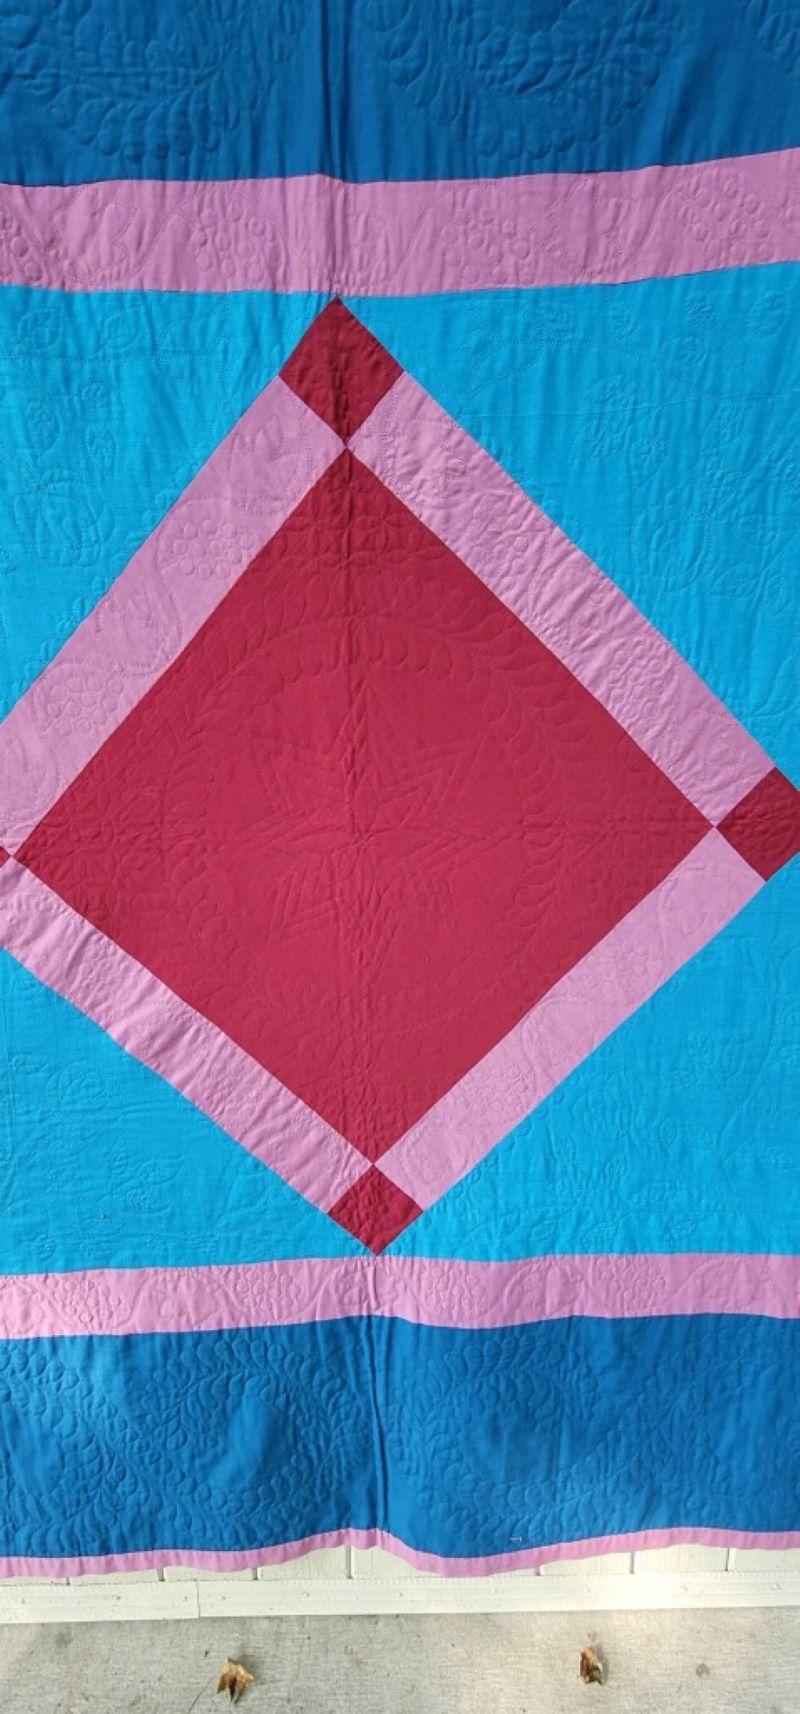 This fine and unusual all wool diamond in a square quilt from Lancaster County,Pennsylvania. This fine five color diamond in a square is in great condition. This quilt has very fine quilting with grapes and flowers quilted through out. The backing